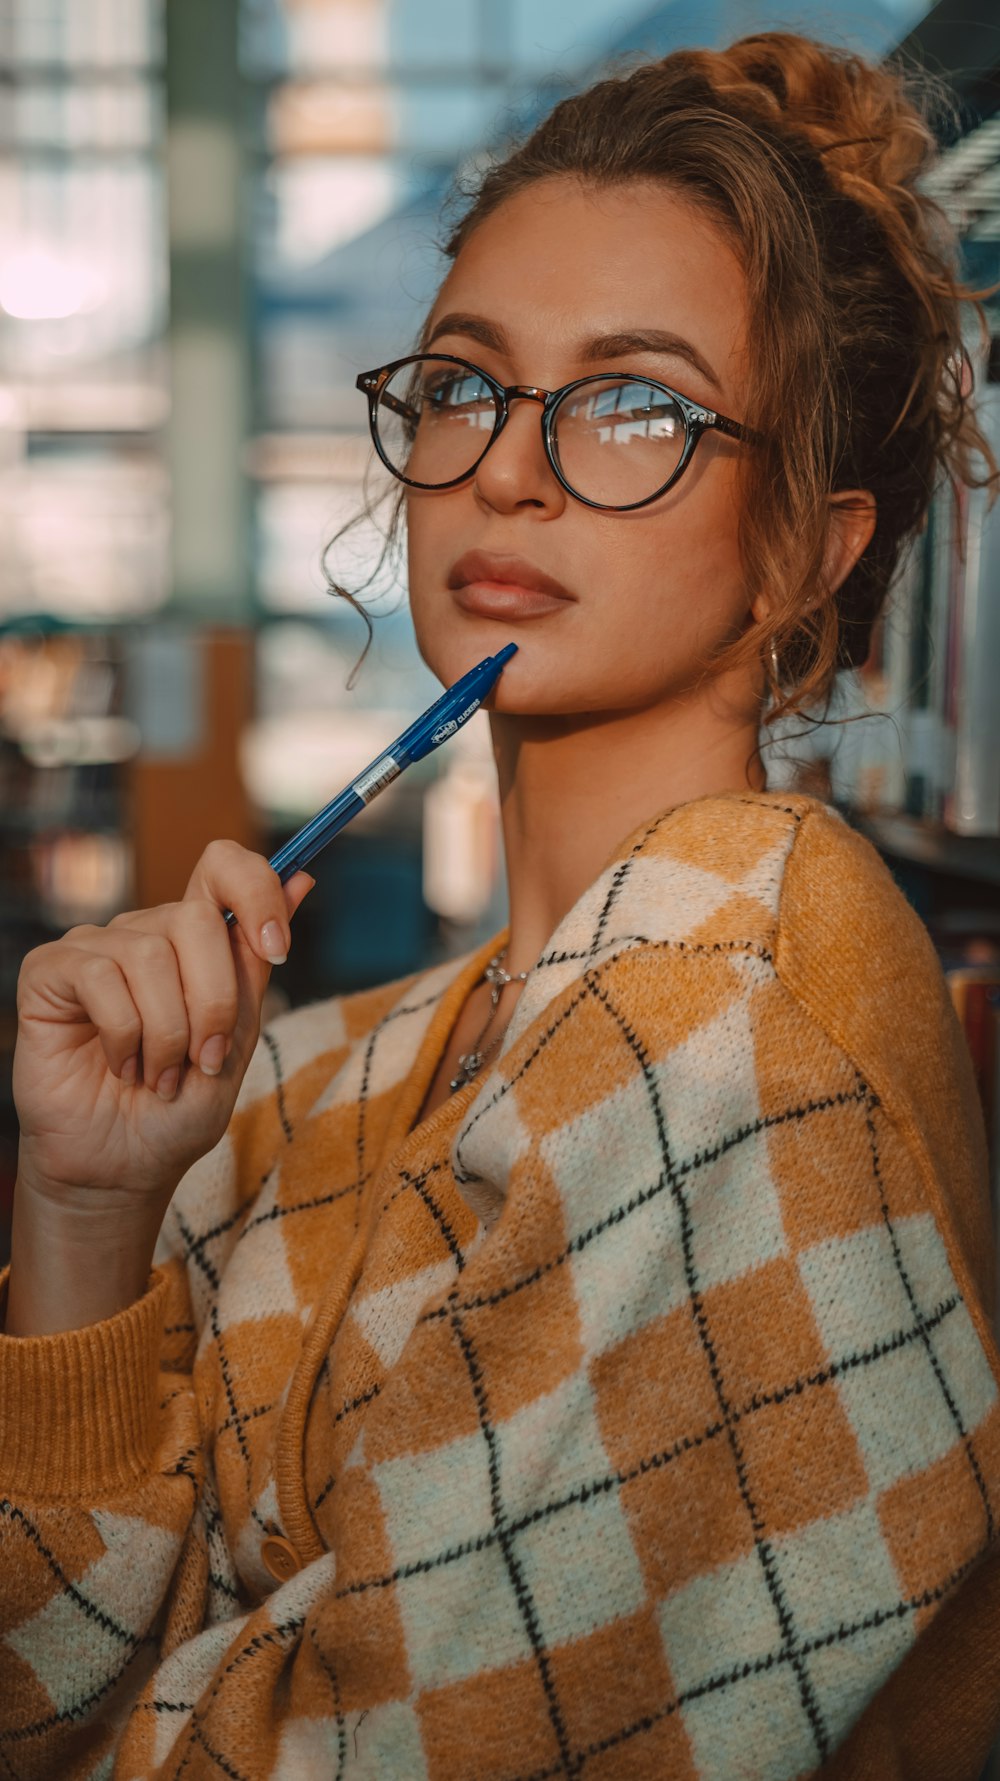 a woman with glasses holding a toothbrush in her mouth